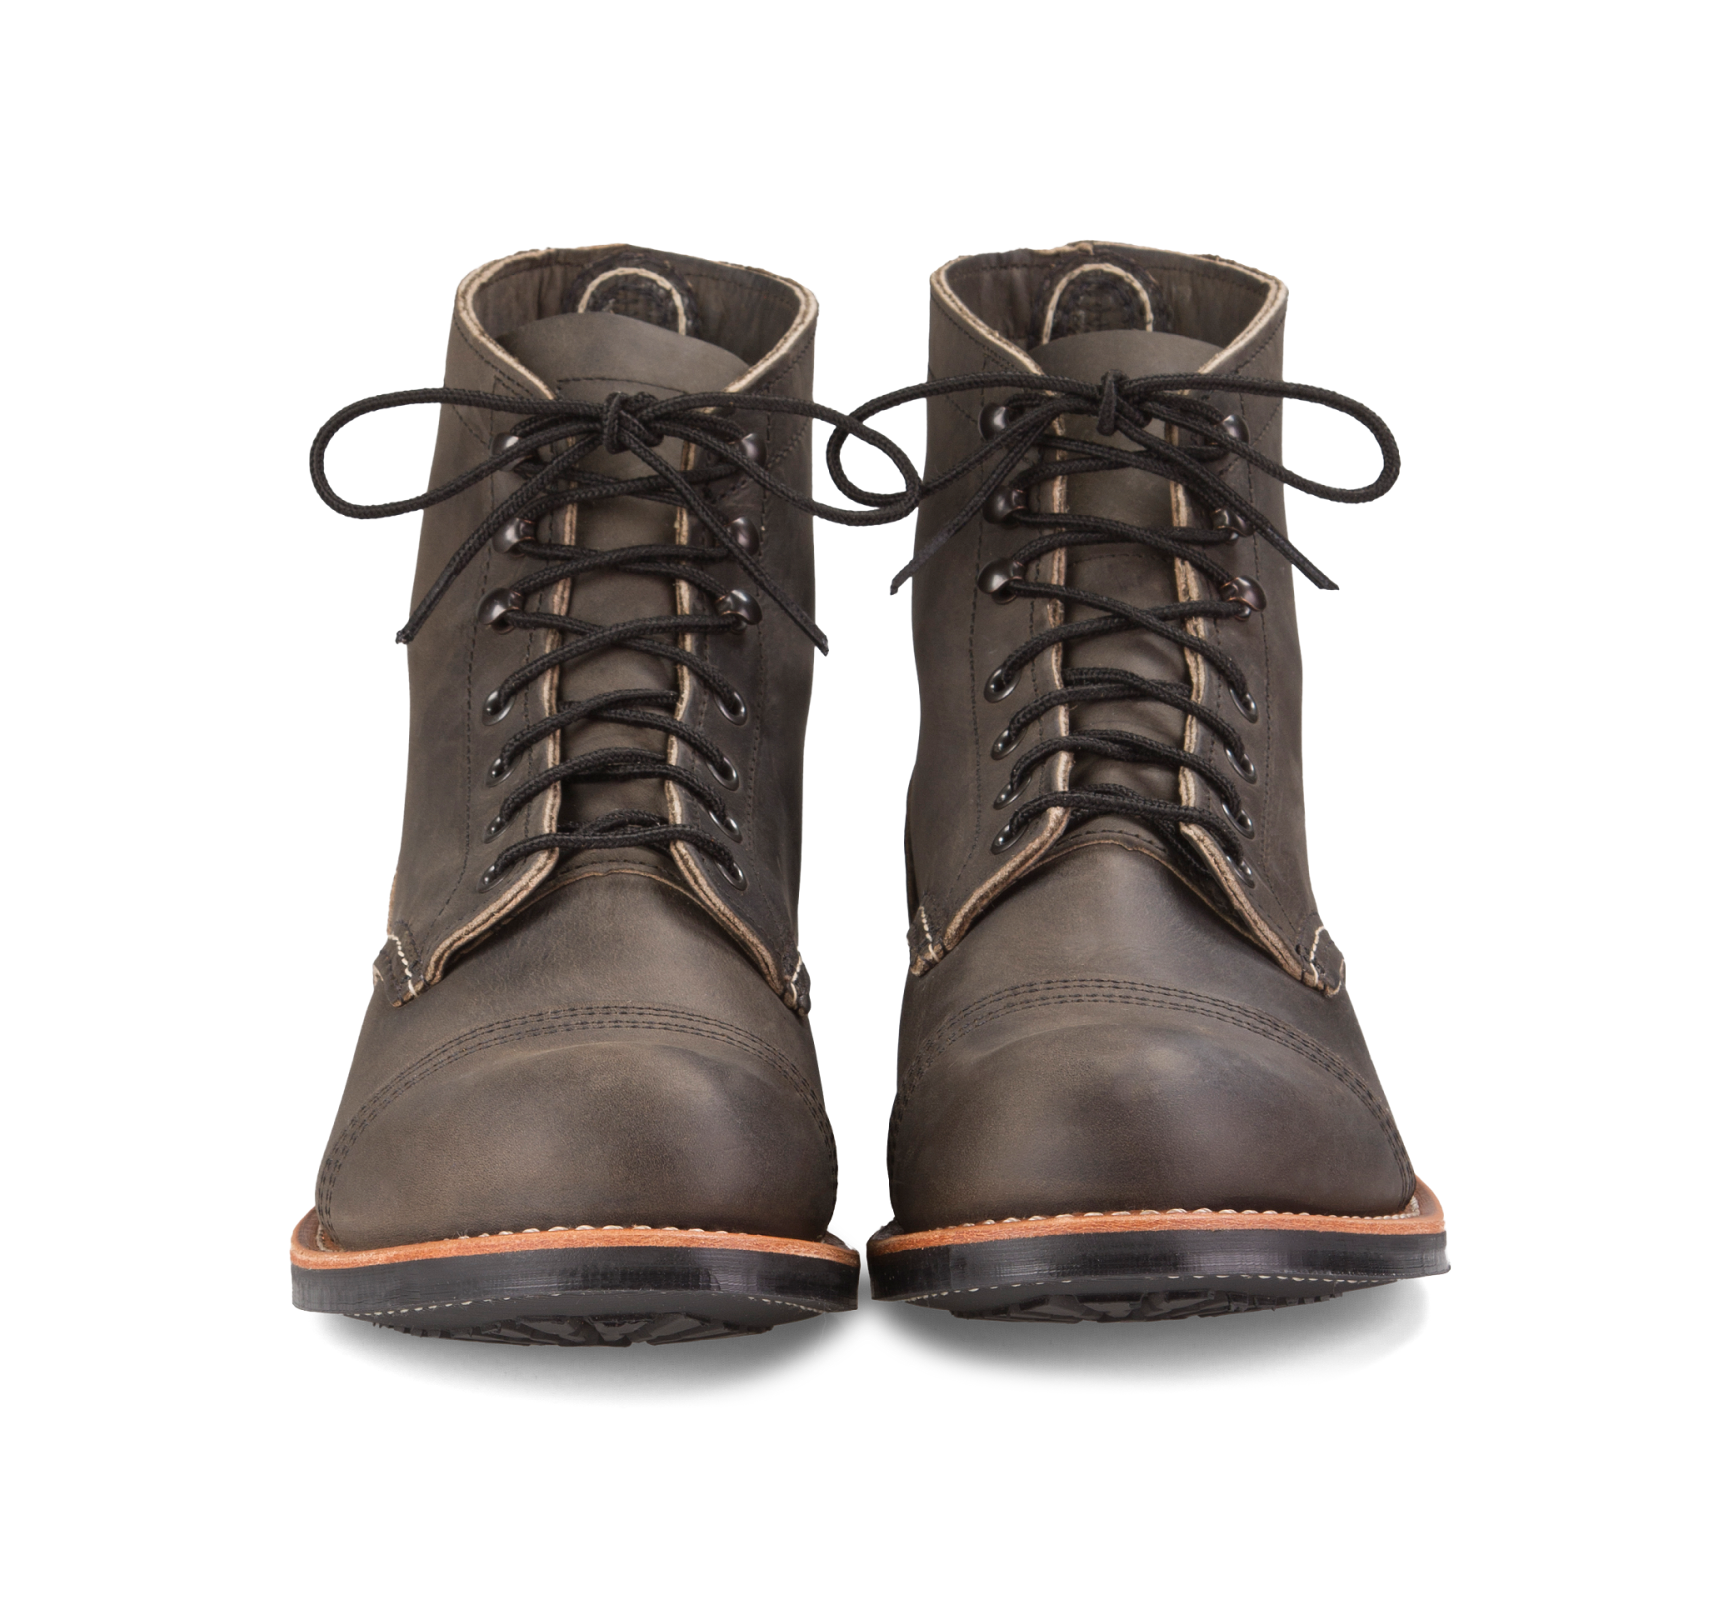 Red Wing Heritage #8086 - Iron Ranger boot (Charcoal) pair